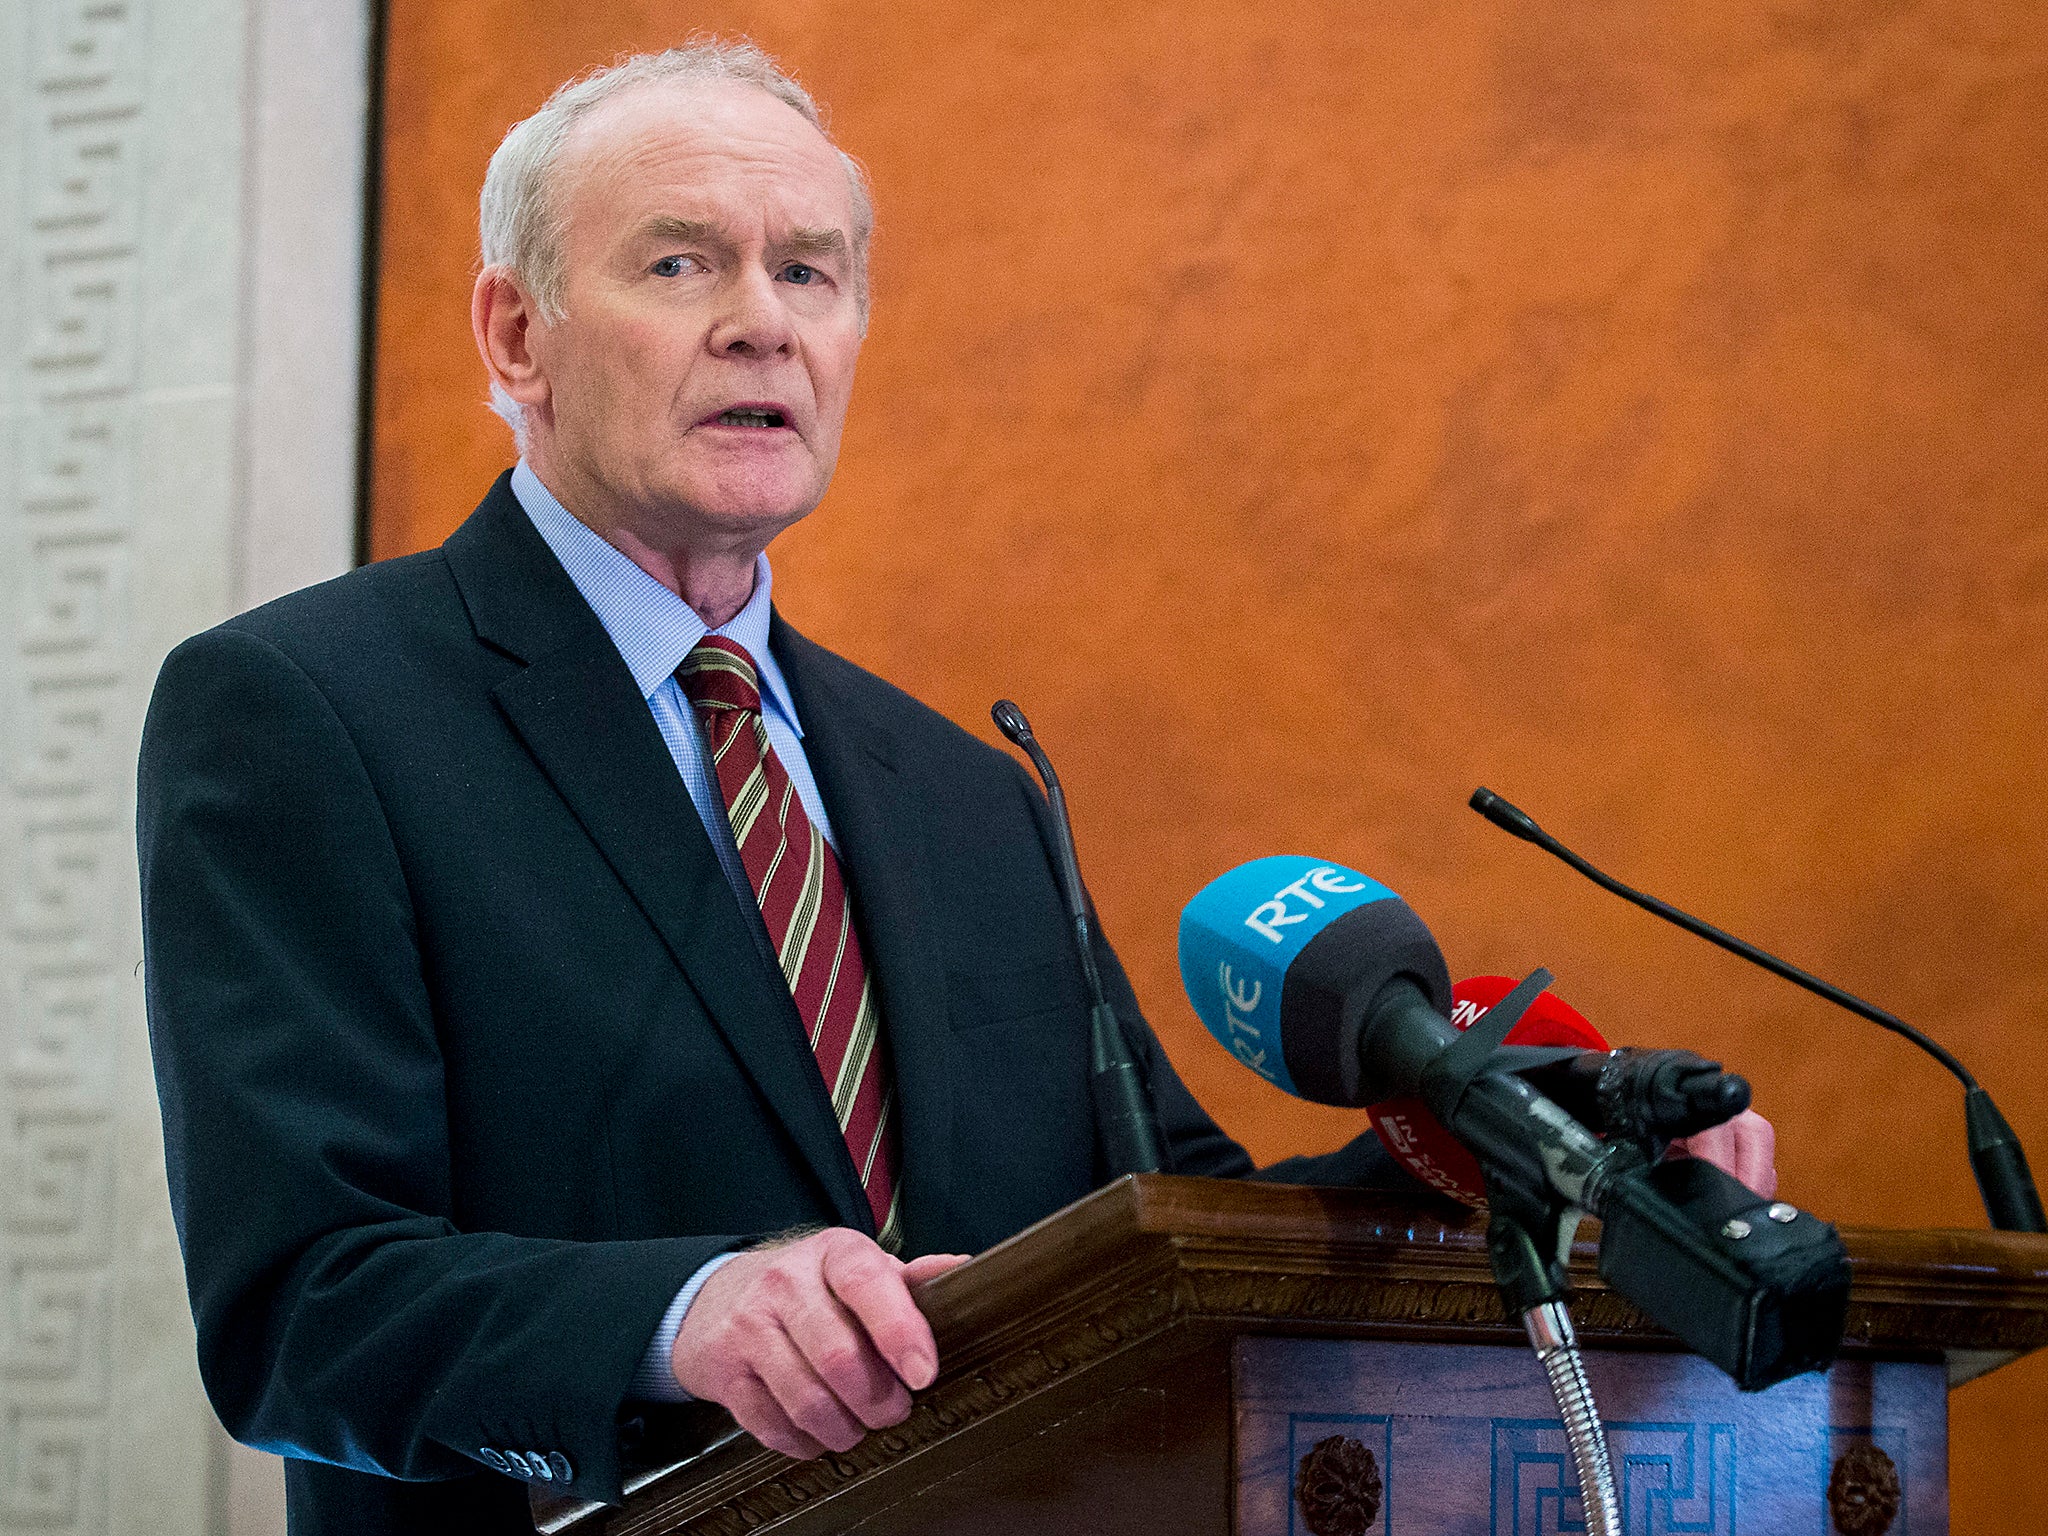 McGuinness led the call for an election